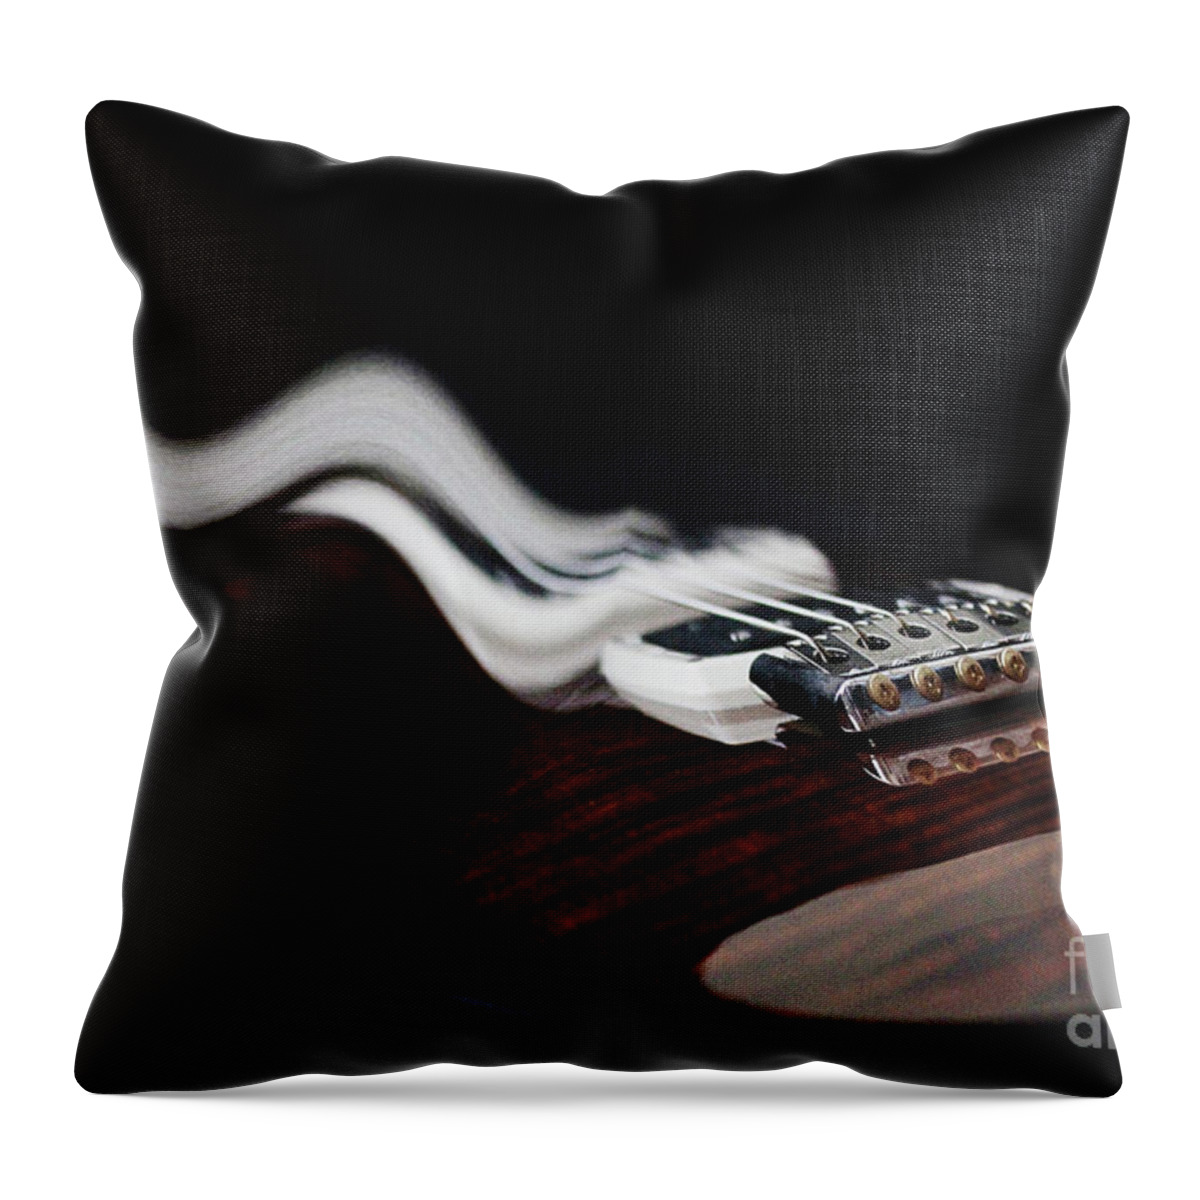 Guitar Wave Throw Pillow featuring the photograph Guitar Wave by Natalie Dowty